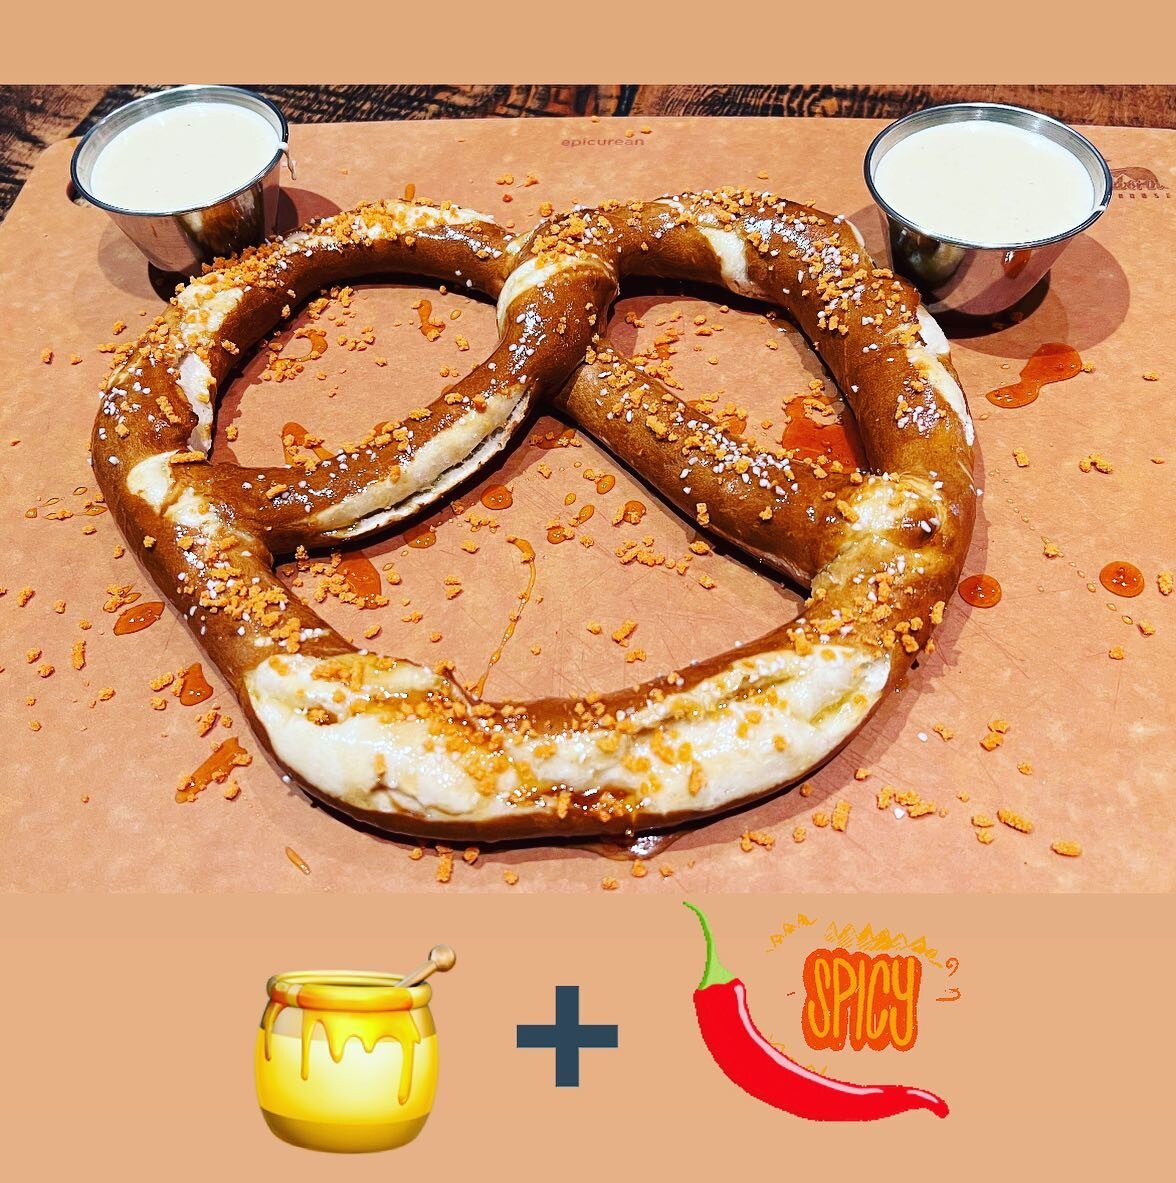 🚨 Meet the Newest Addition 🚨 
.
The Honey Hot Habanero Pretzel! 
.
A Giant Hand Twisted Bavarian Pretzel with a Honey Buttered Crust, Lightly Sprinkled with Salt, then Dusted with Habanero Spice Crystal&rsquo;s! Served with our House-made Beer Chee